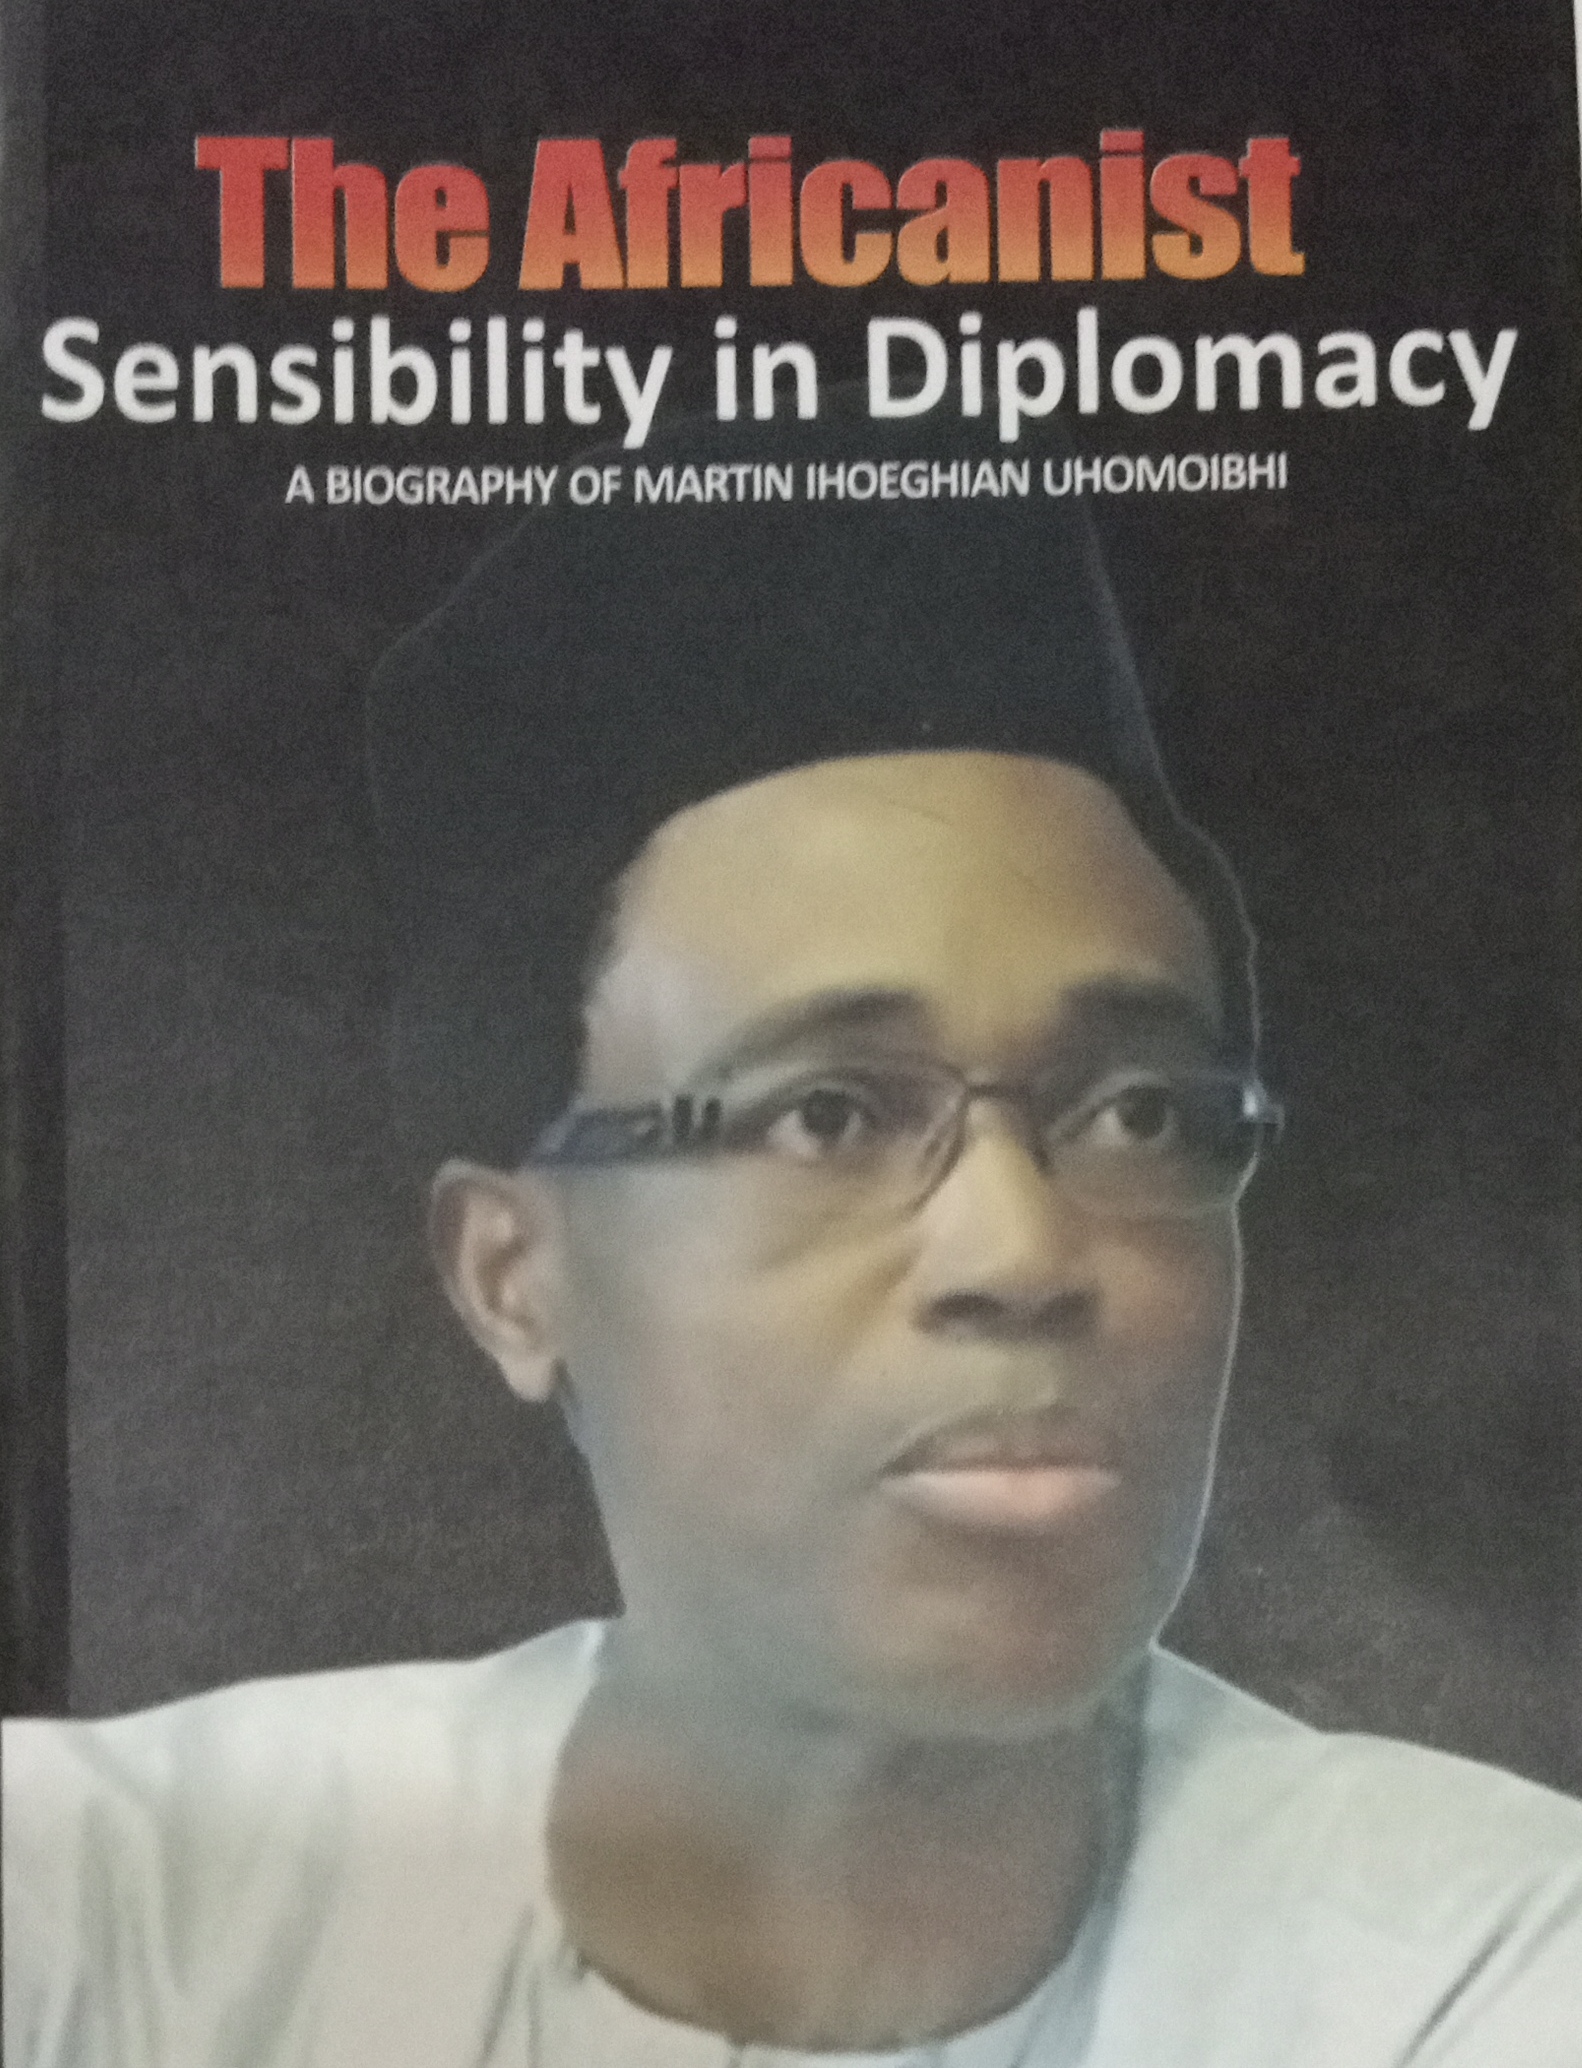 The Story Behind the Story of One Nigerian Diplomatic Career